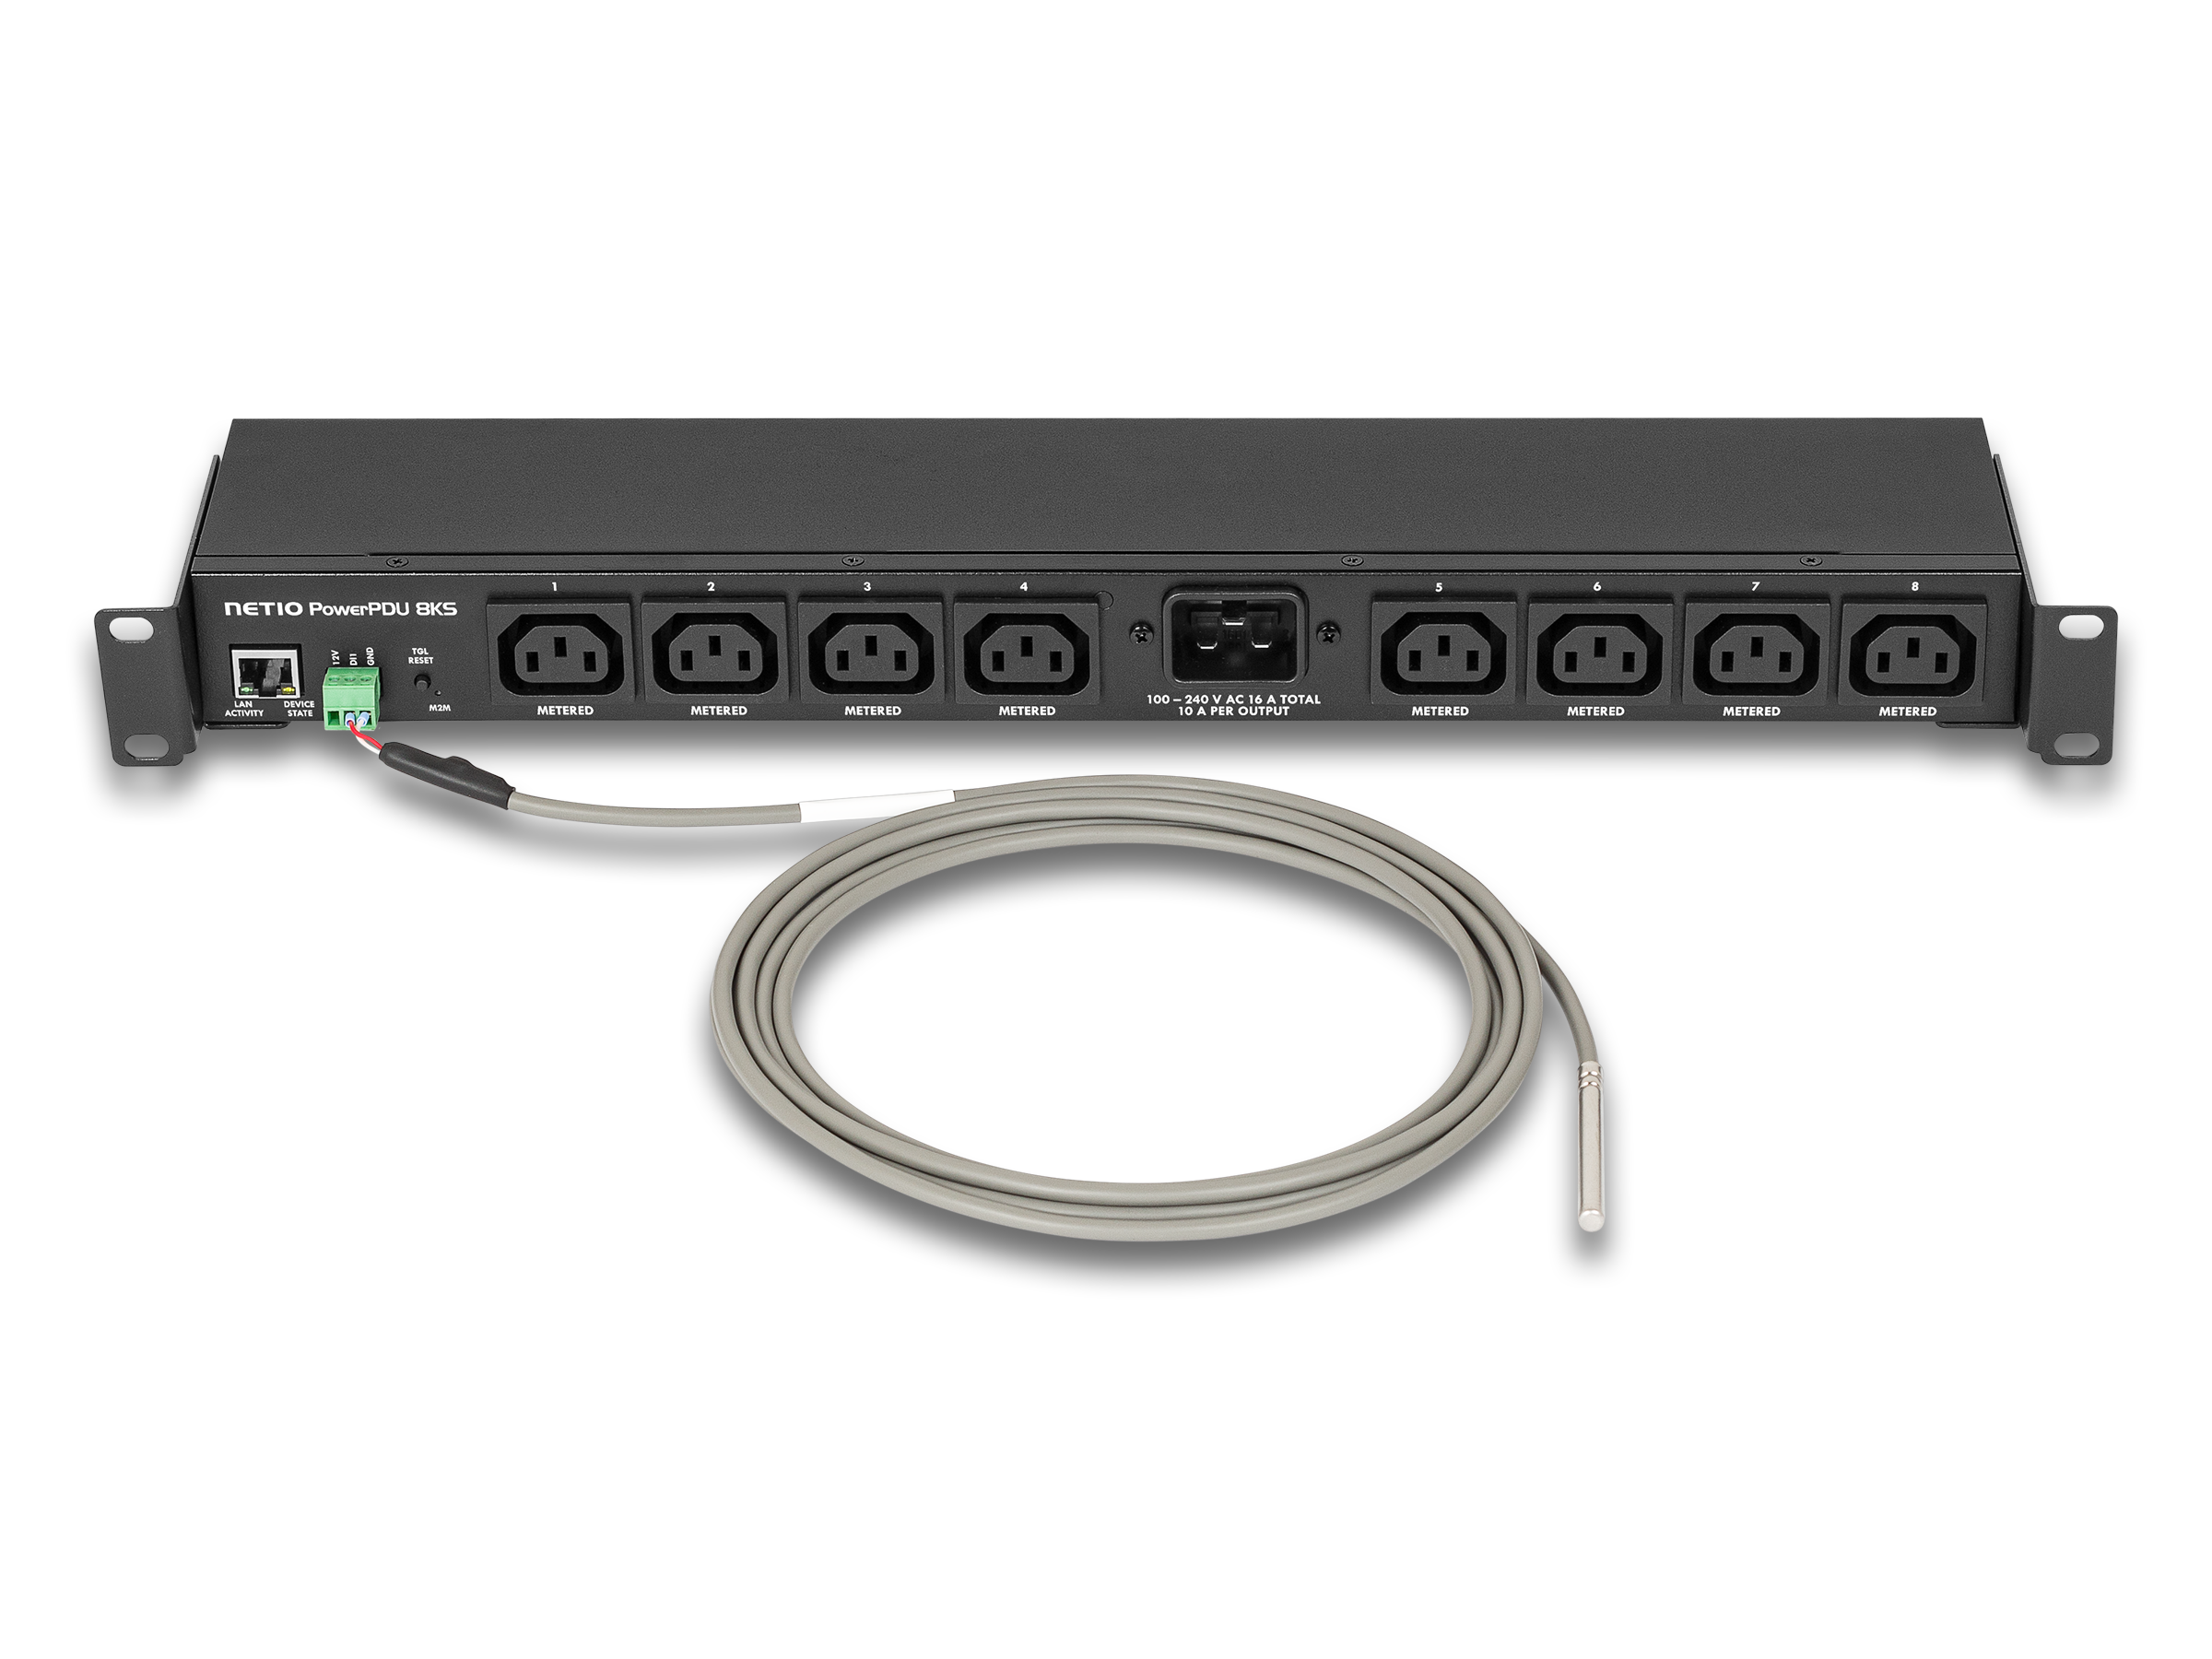 Netio PowerPDU 8KS is full metered smart 19&quot; 1U PDU with RJ45 LAN &amp; web interface . 8 power outputs (C13) / 1 power input (C20). Each output is metered and can be switched individually. Several M2M APIs (SNMPv1 &amp; MQTT-flex supported), NETIO Coud. 19&quot; montage holders included. EU power-cable included. 